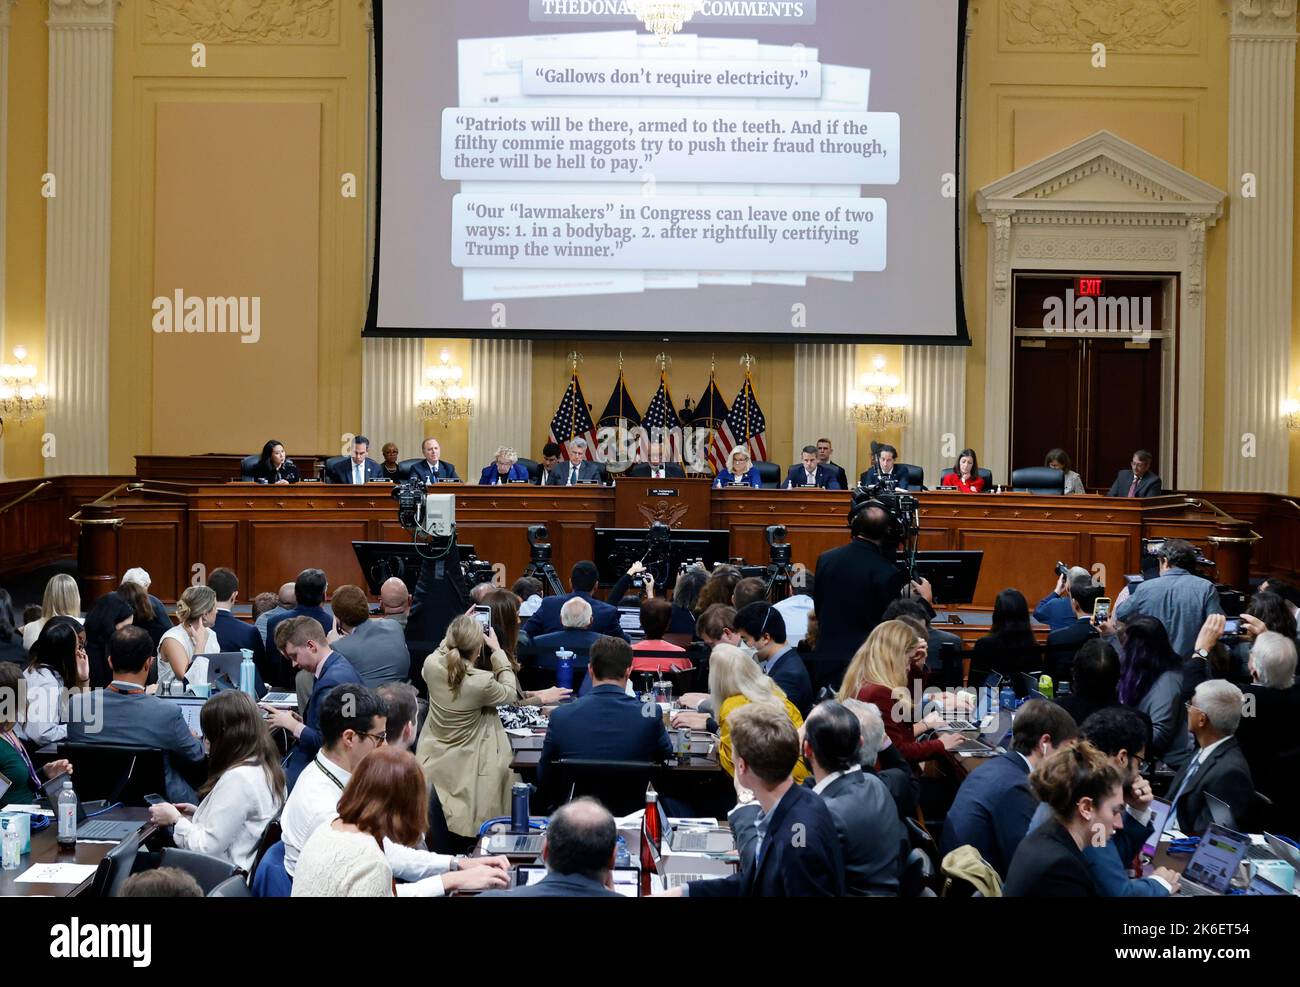 The United States House Select Committee to Investigate the January 6 Attack on the U.S. Capitol displays threatening messages posted by former President Donald Trump's supporters before January 6, 2021 on TheDonald.Win internet forum during the committee's public hearing on Capitol Hill in Washington, U.S., October 13, 2022. Credit: Jonathan Ernst/Pool via CNP /MediaPunch Stock Photo